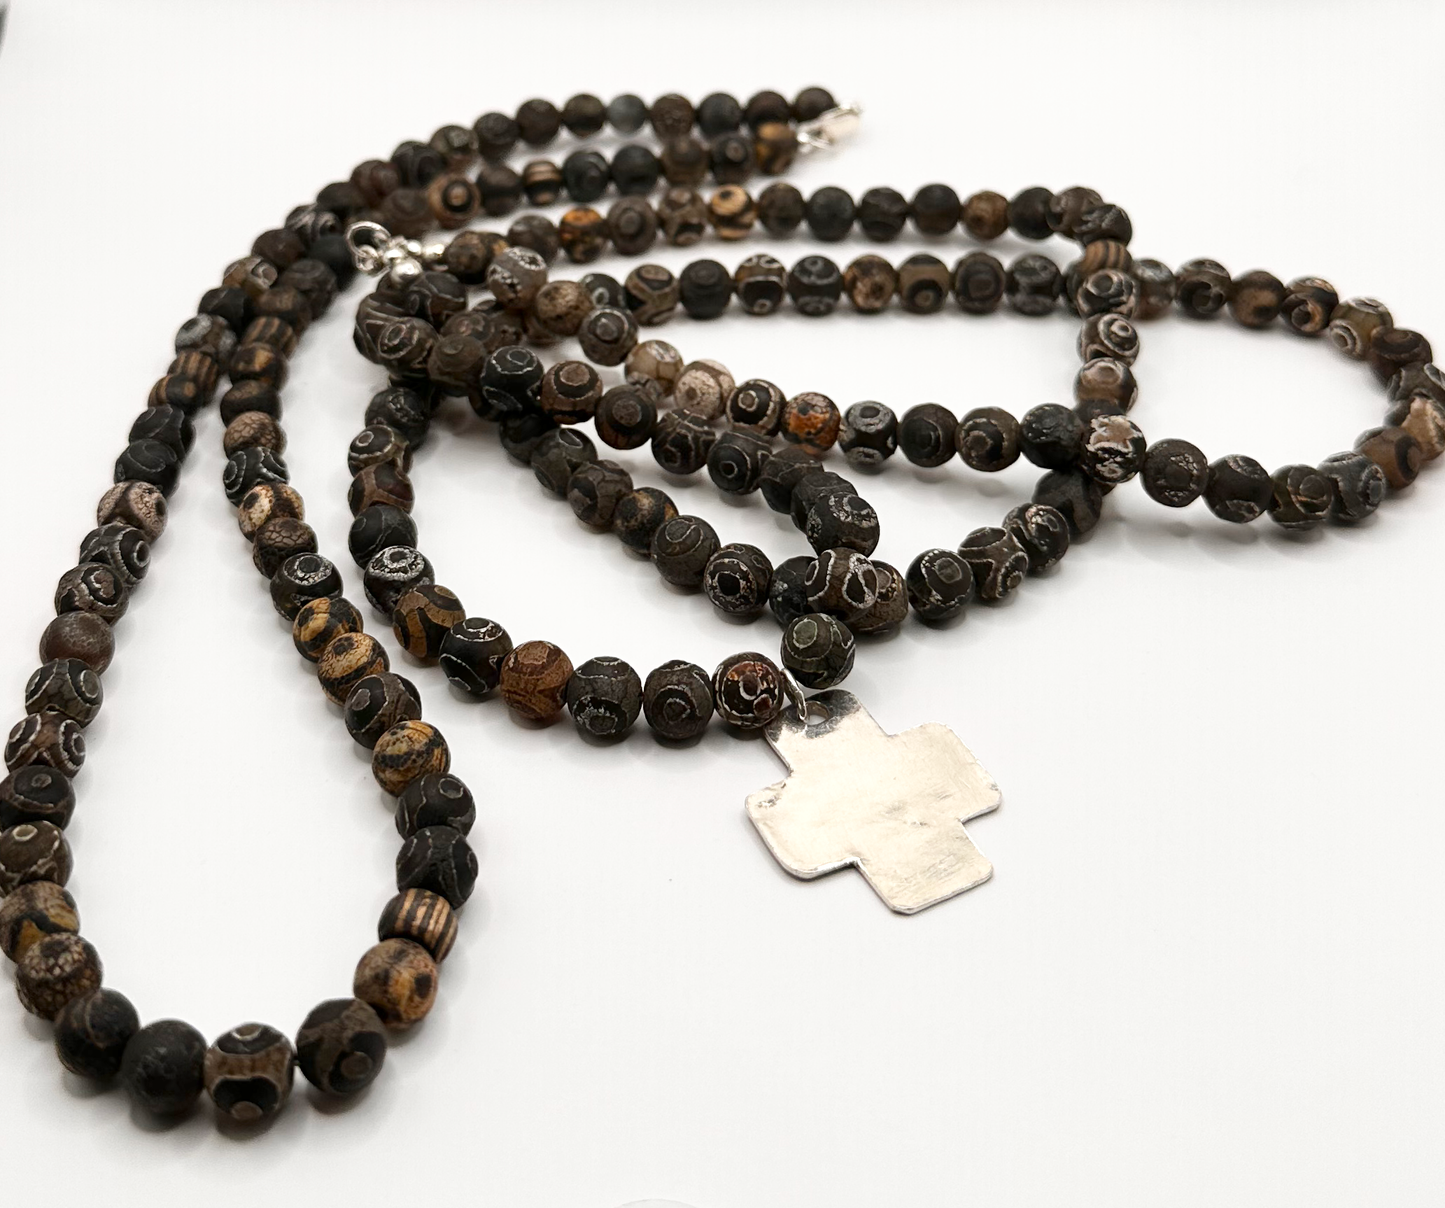 Natural Tiger Skin Sandalwood Double Strand Bead Necklace with a Fine Silver (.999) Cross